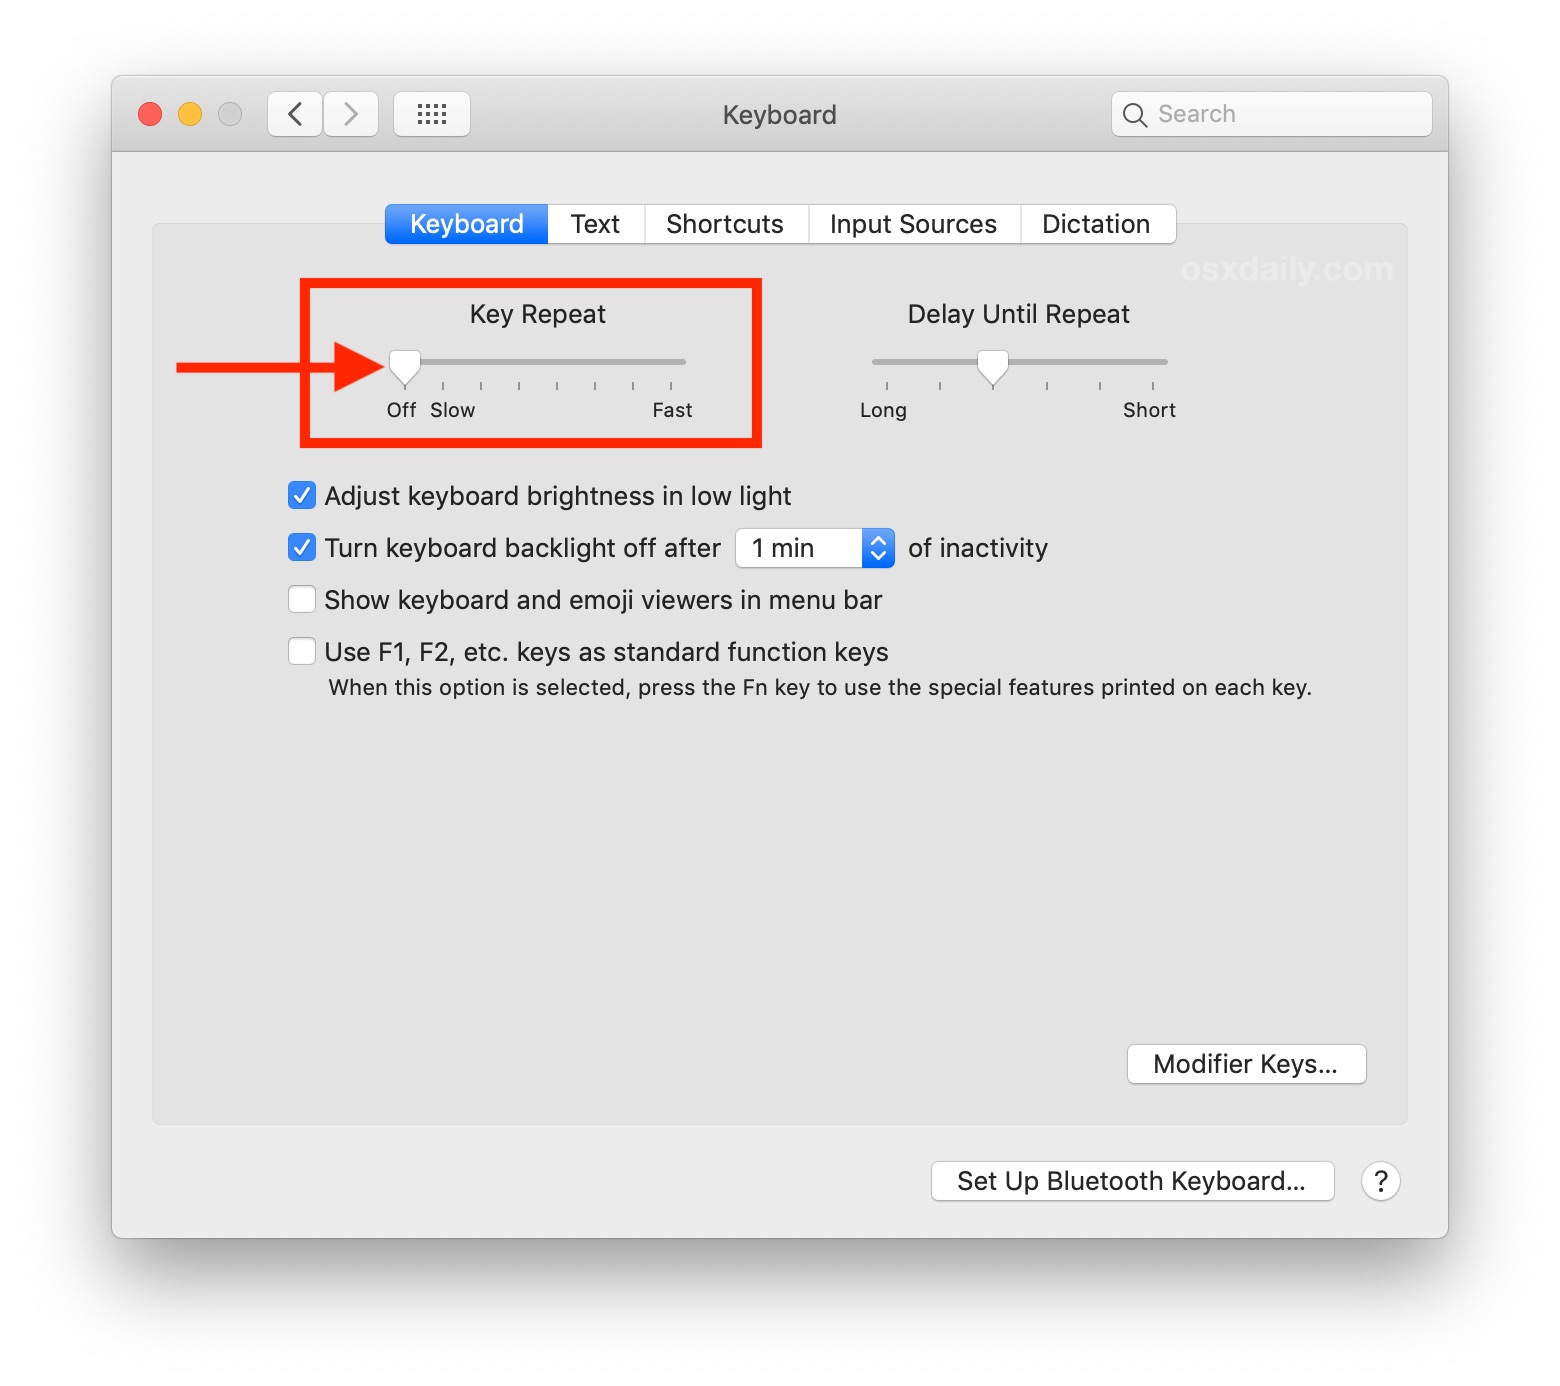 How to fix double typing keys on Mac by turning off key repeat